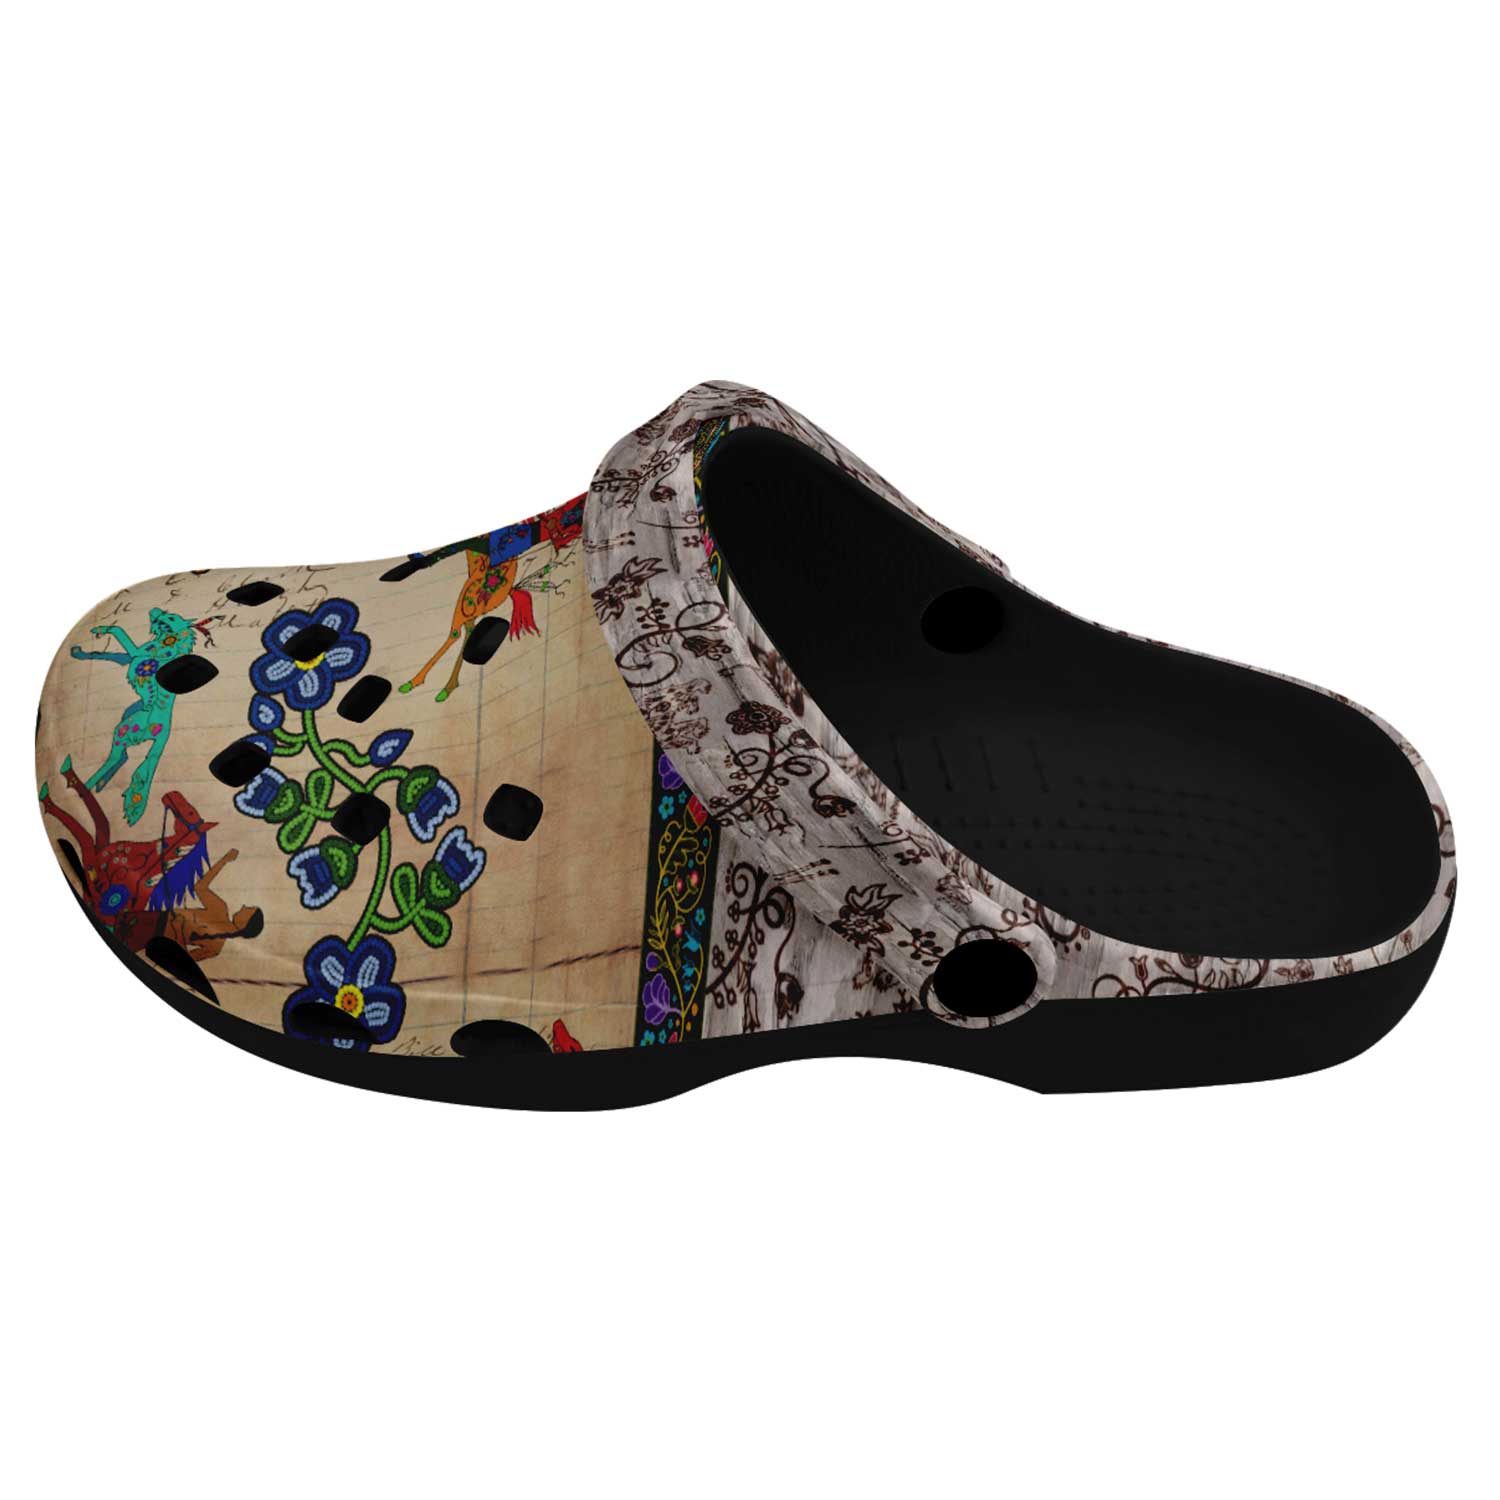 Brothers Race Muddies Unisex Clog Shoes